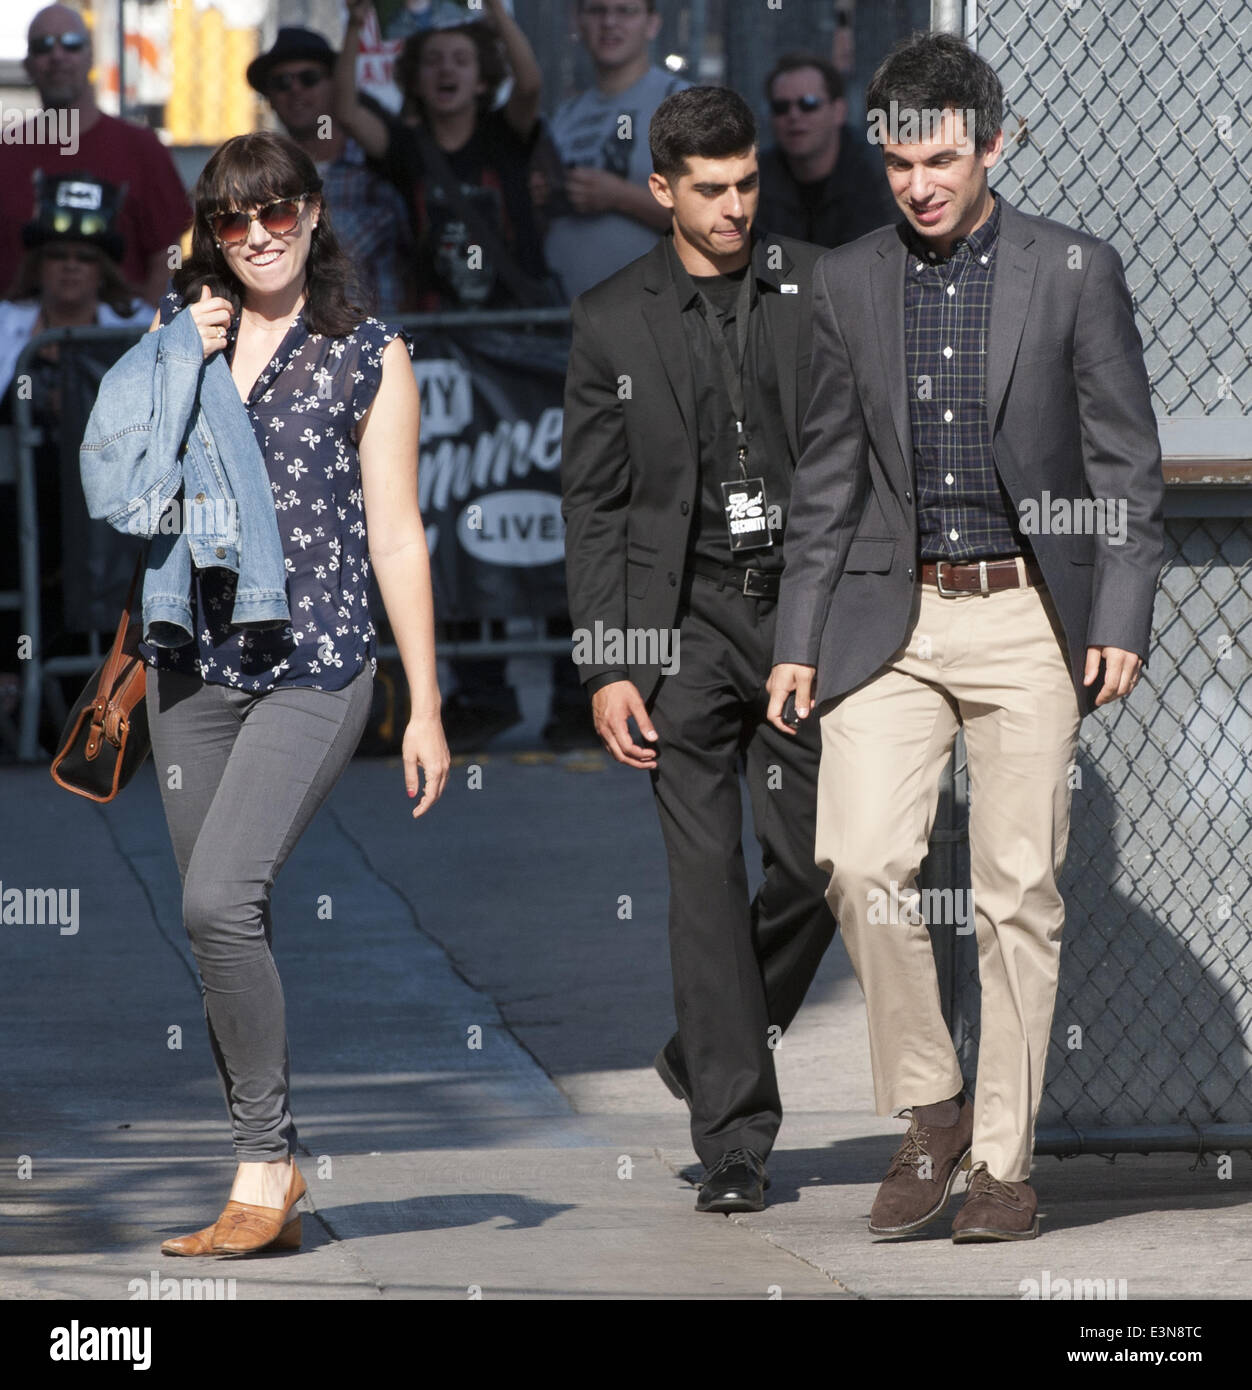 Hollywood, California, USA. 25th June, 2014. Comedy Central Prankster Nathan Fielder arrives for a taping of Jimmy Kimmel Live! on Wednesday afternoon at the El Capitan Theatre in Hollywood. Fielder made national news for opening up a coffee shop in Los Angeles he called ''Dumb Starbucks Coffee, '' in February of 2014. Los Angeles health inspectors closed the store before the original Starbucks could force closure with a court order. Credit:  David Bro/ZUMAPRESS.com/Alamy Live News Stock Photo